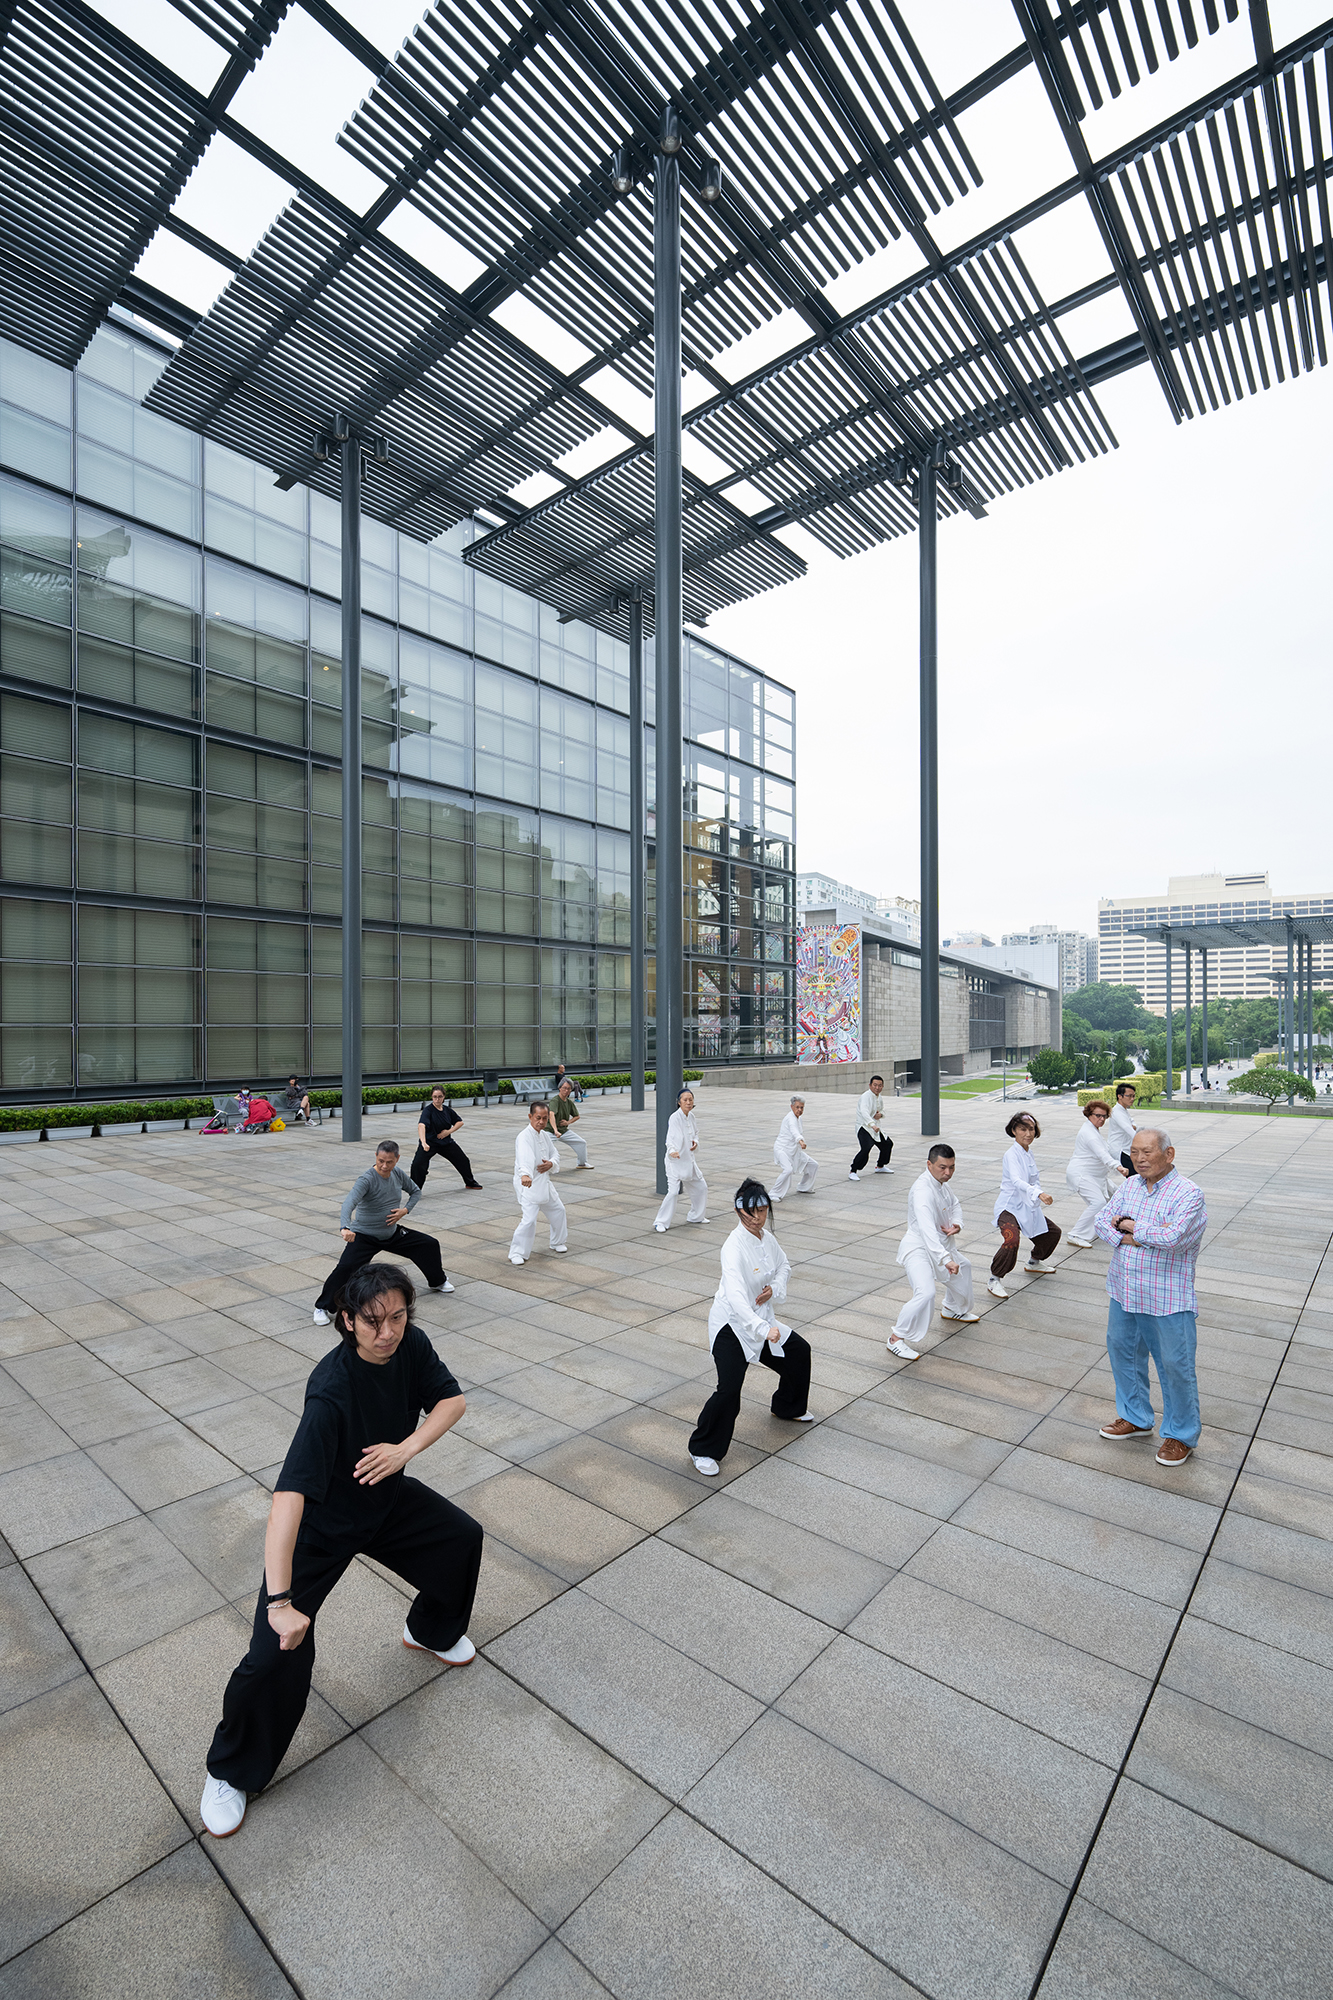 Lei Man Iam has taught Chen-style tai chi to thousands of students over his decades’ long career